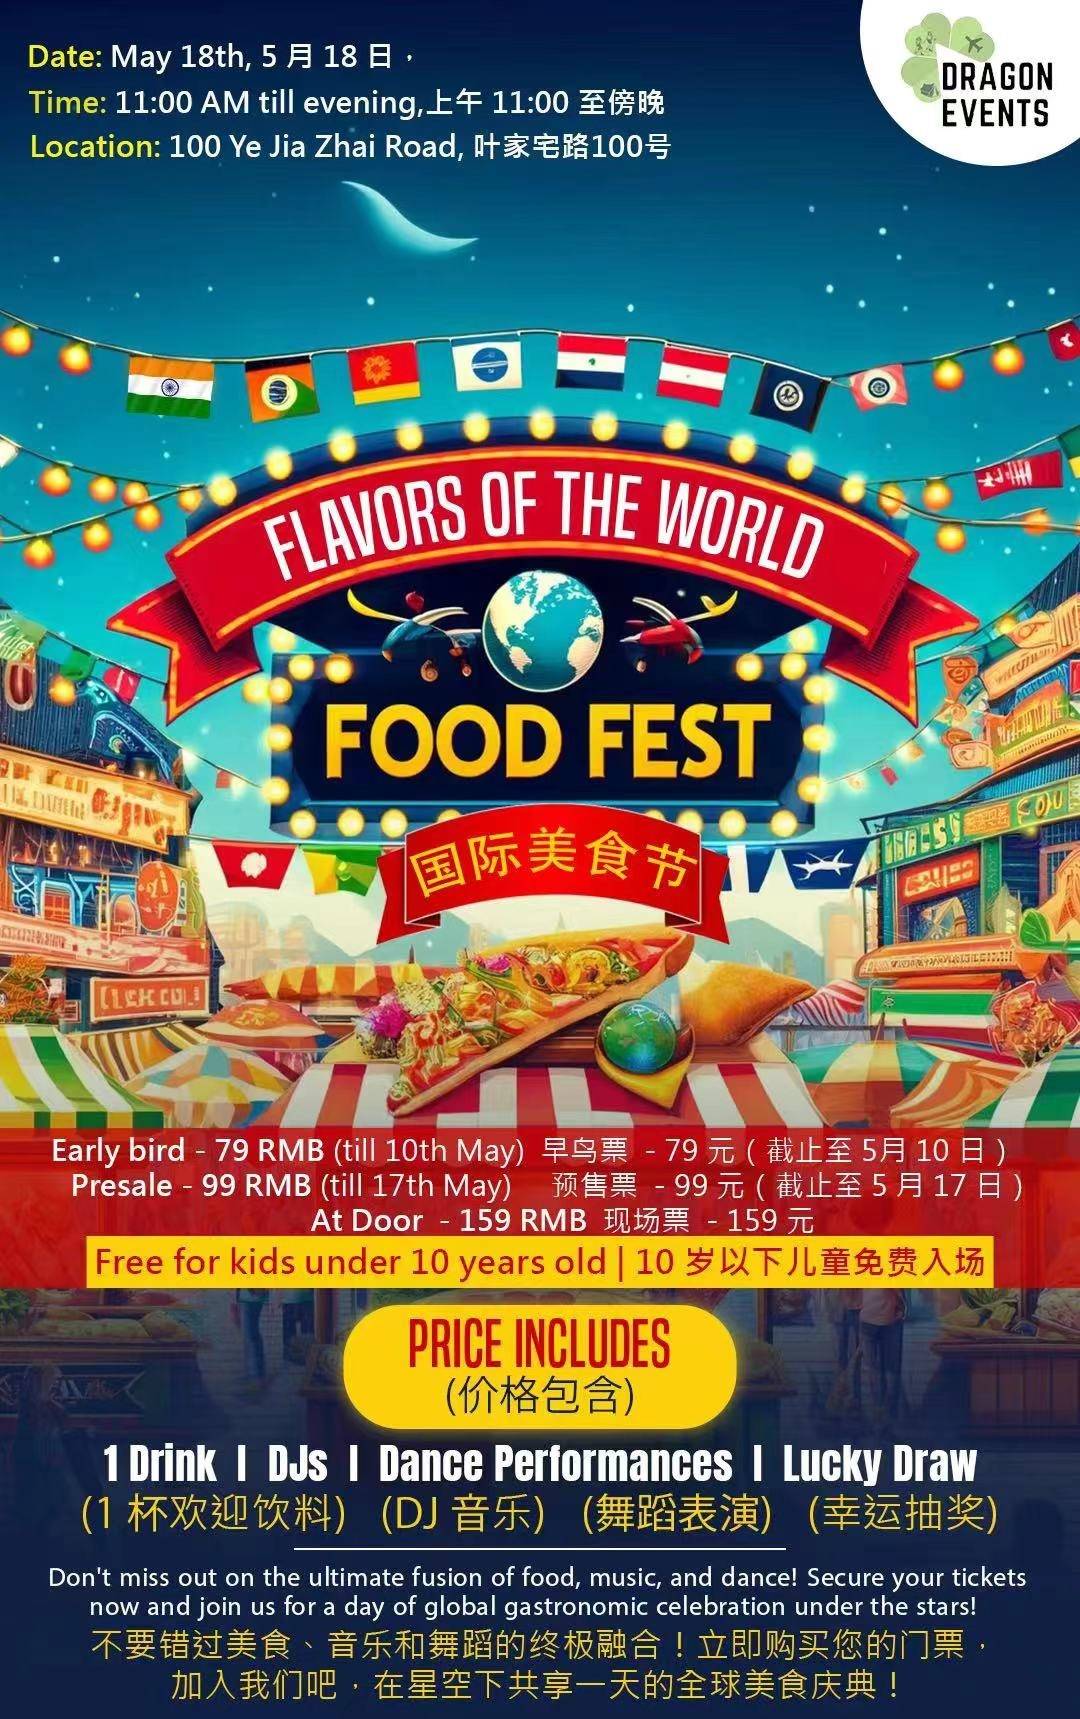 Flavors of the World: Food Fest